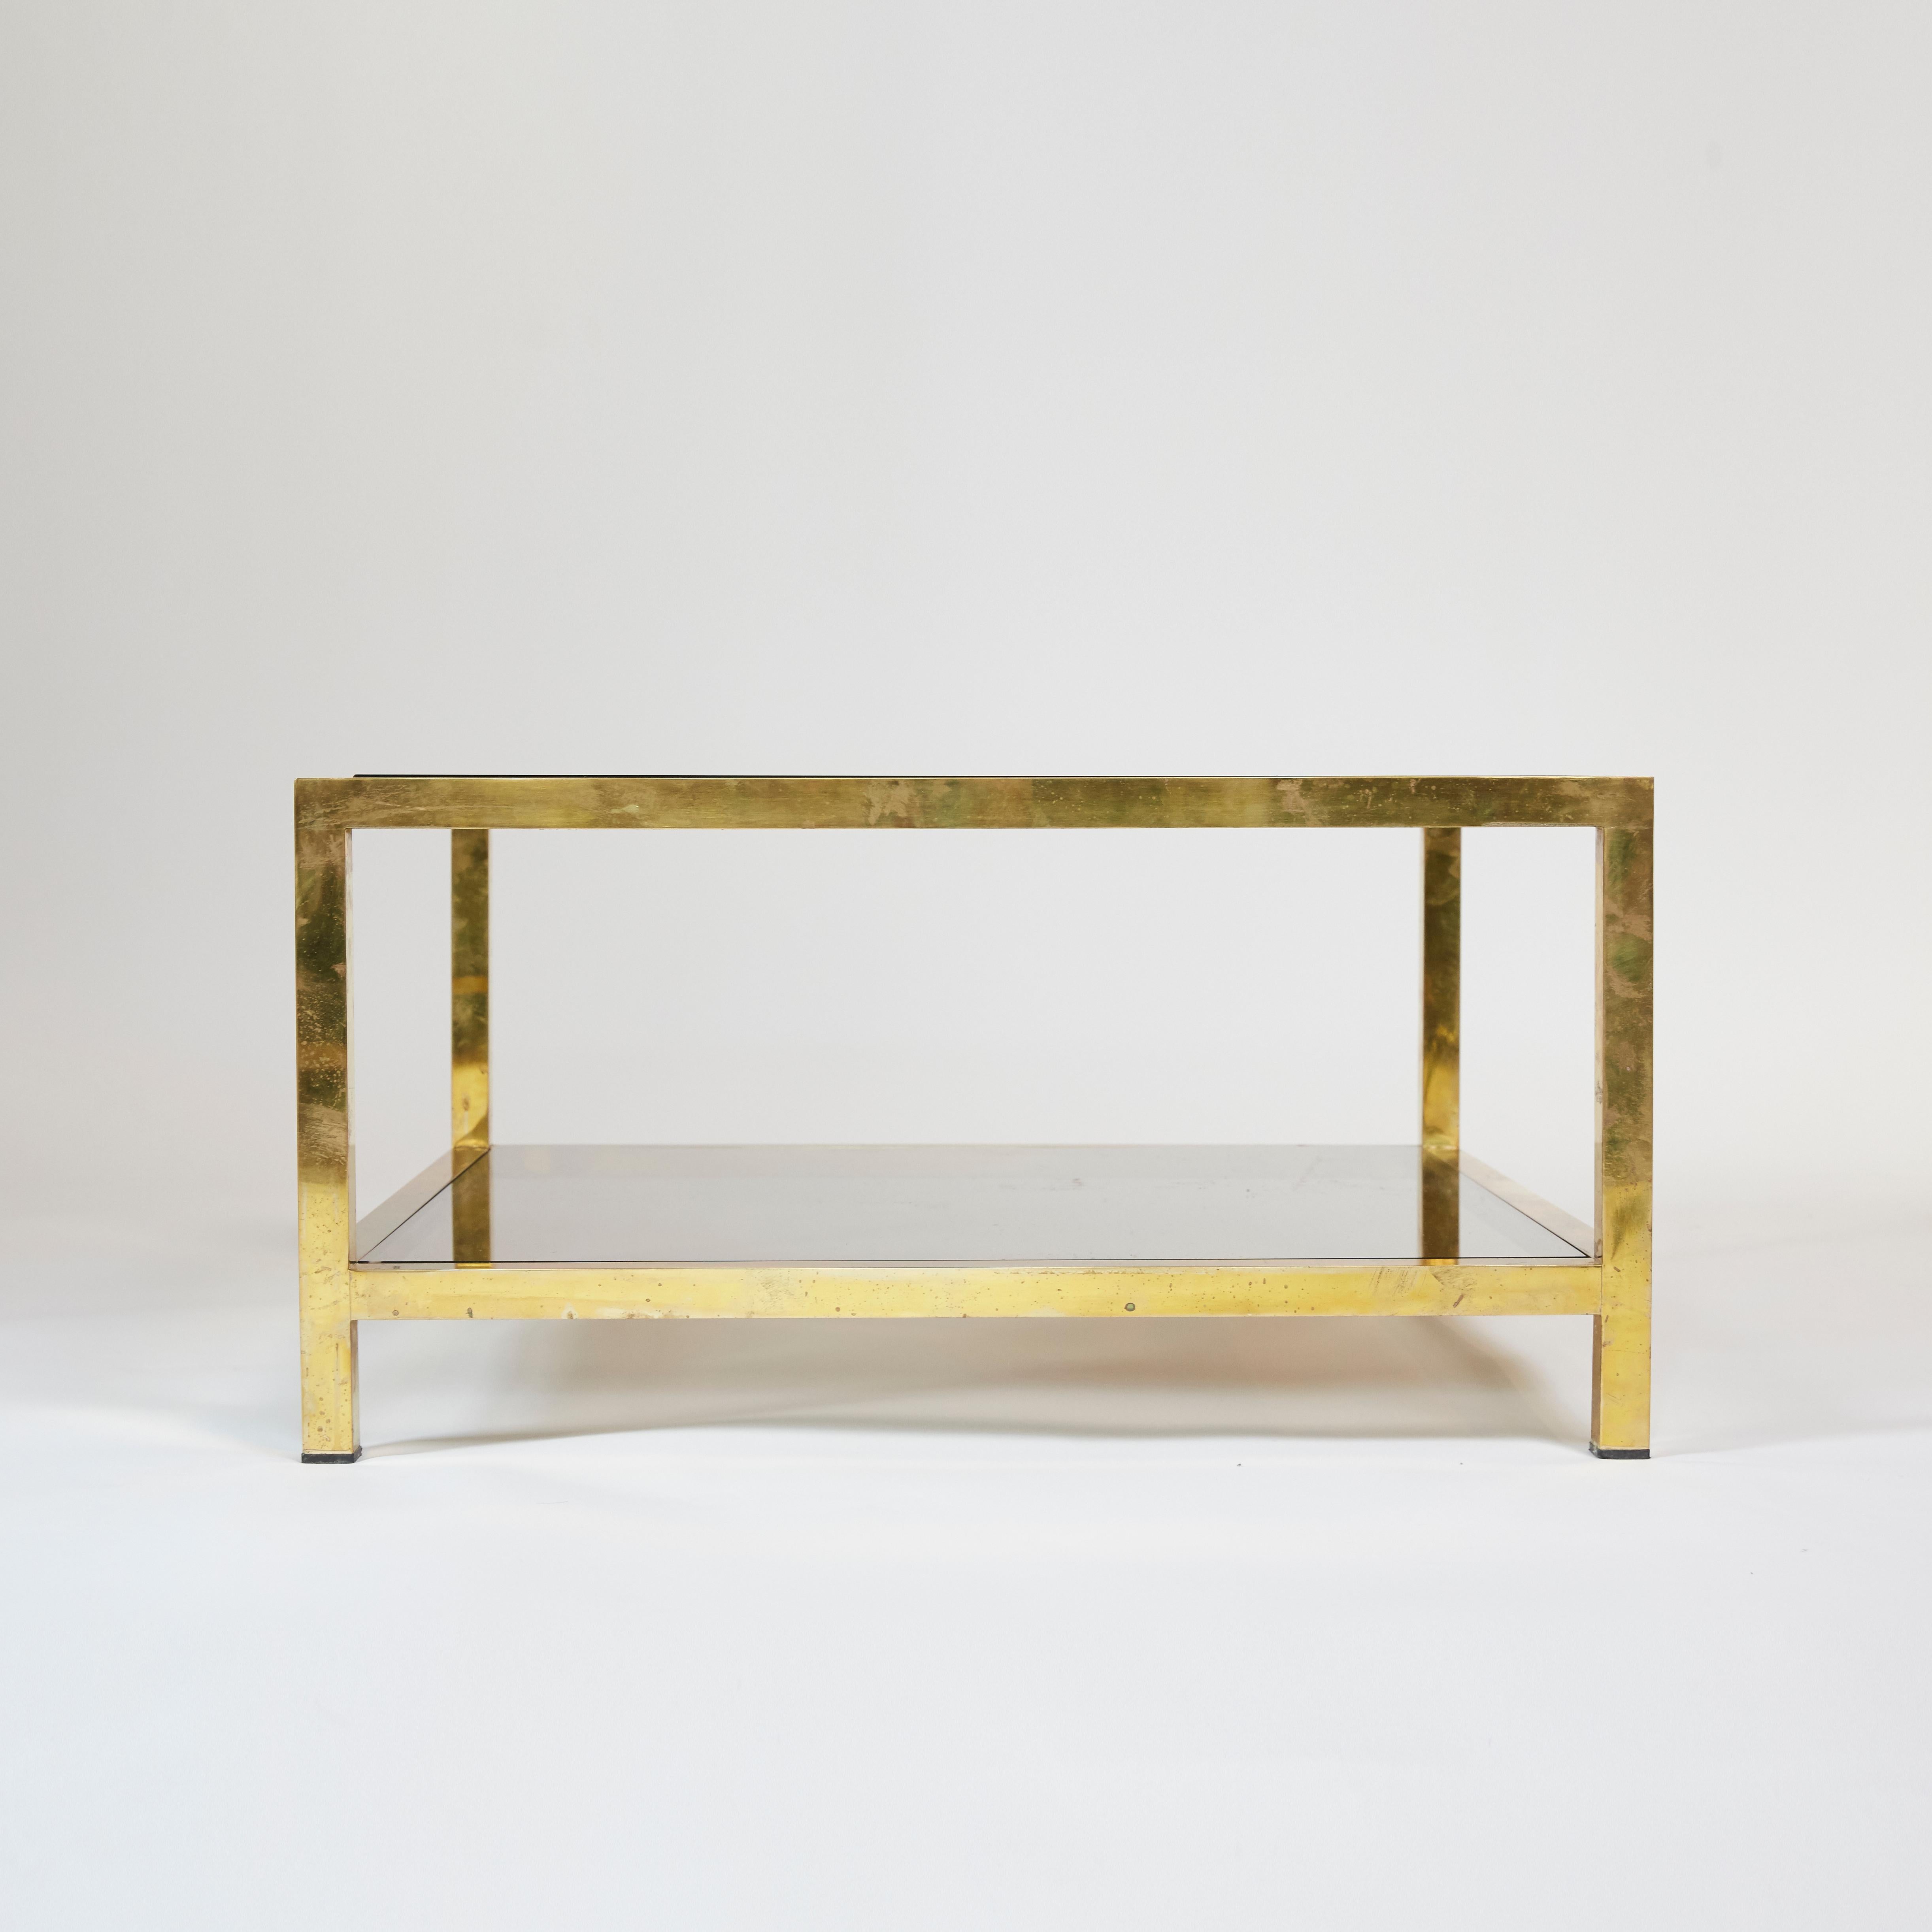 A pair of 1970s Italian coffee tables in brass and smoked glass designed by Romeo Rega. Brass and glass show some marks consistent with age and use.

Measures: W 80 cm x D 80 cm x H 41 cm 
W 31.5 in x D 31.5 in x H 16.14 in.